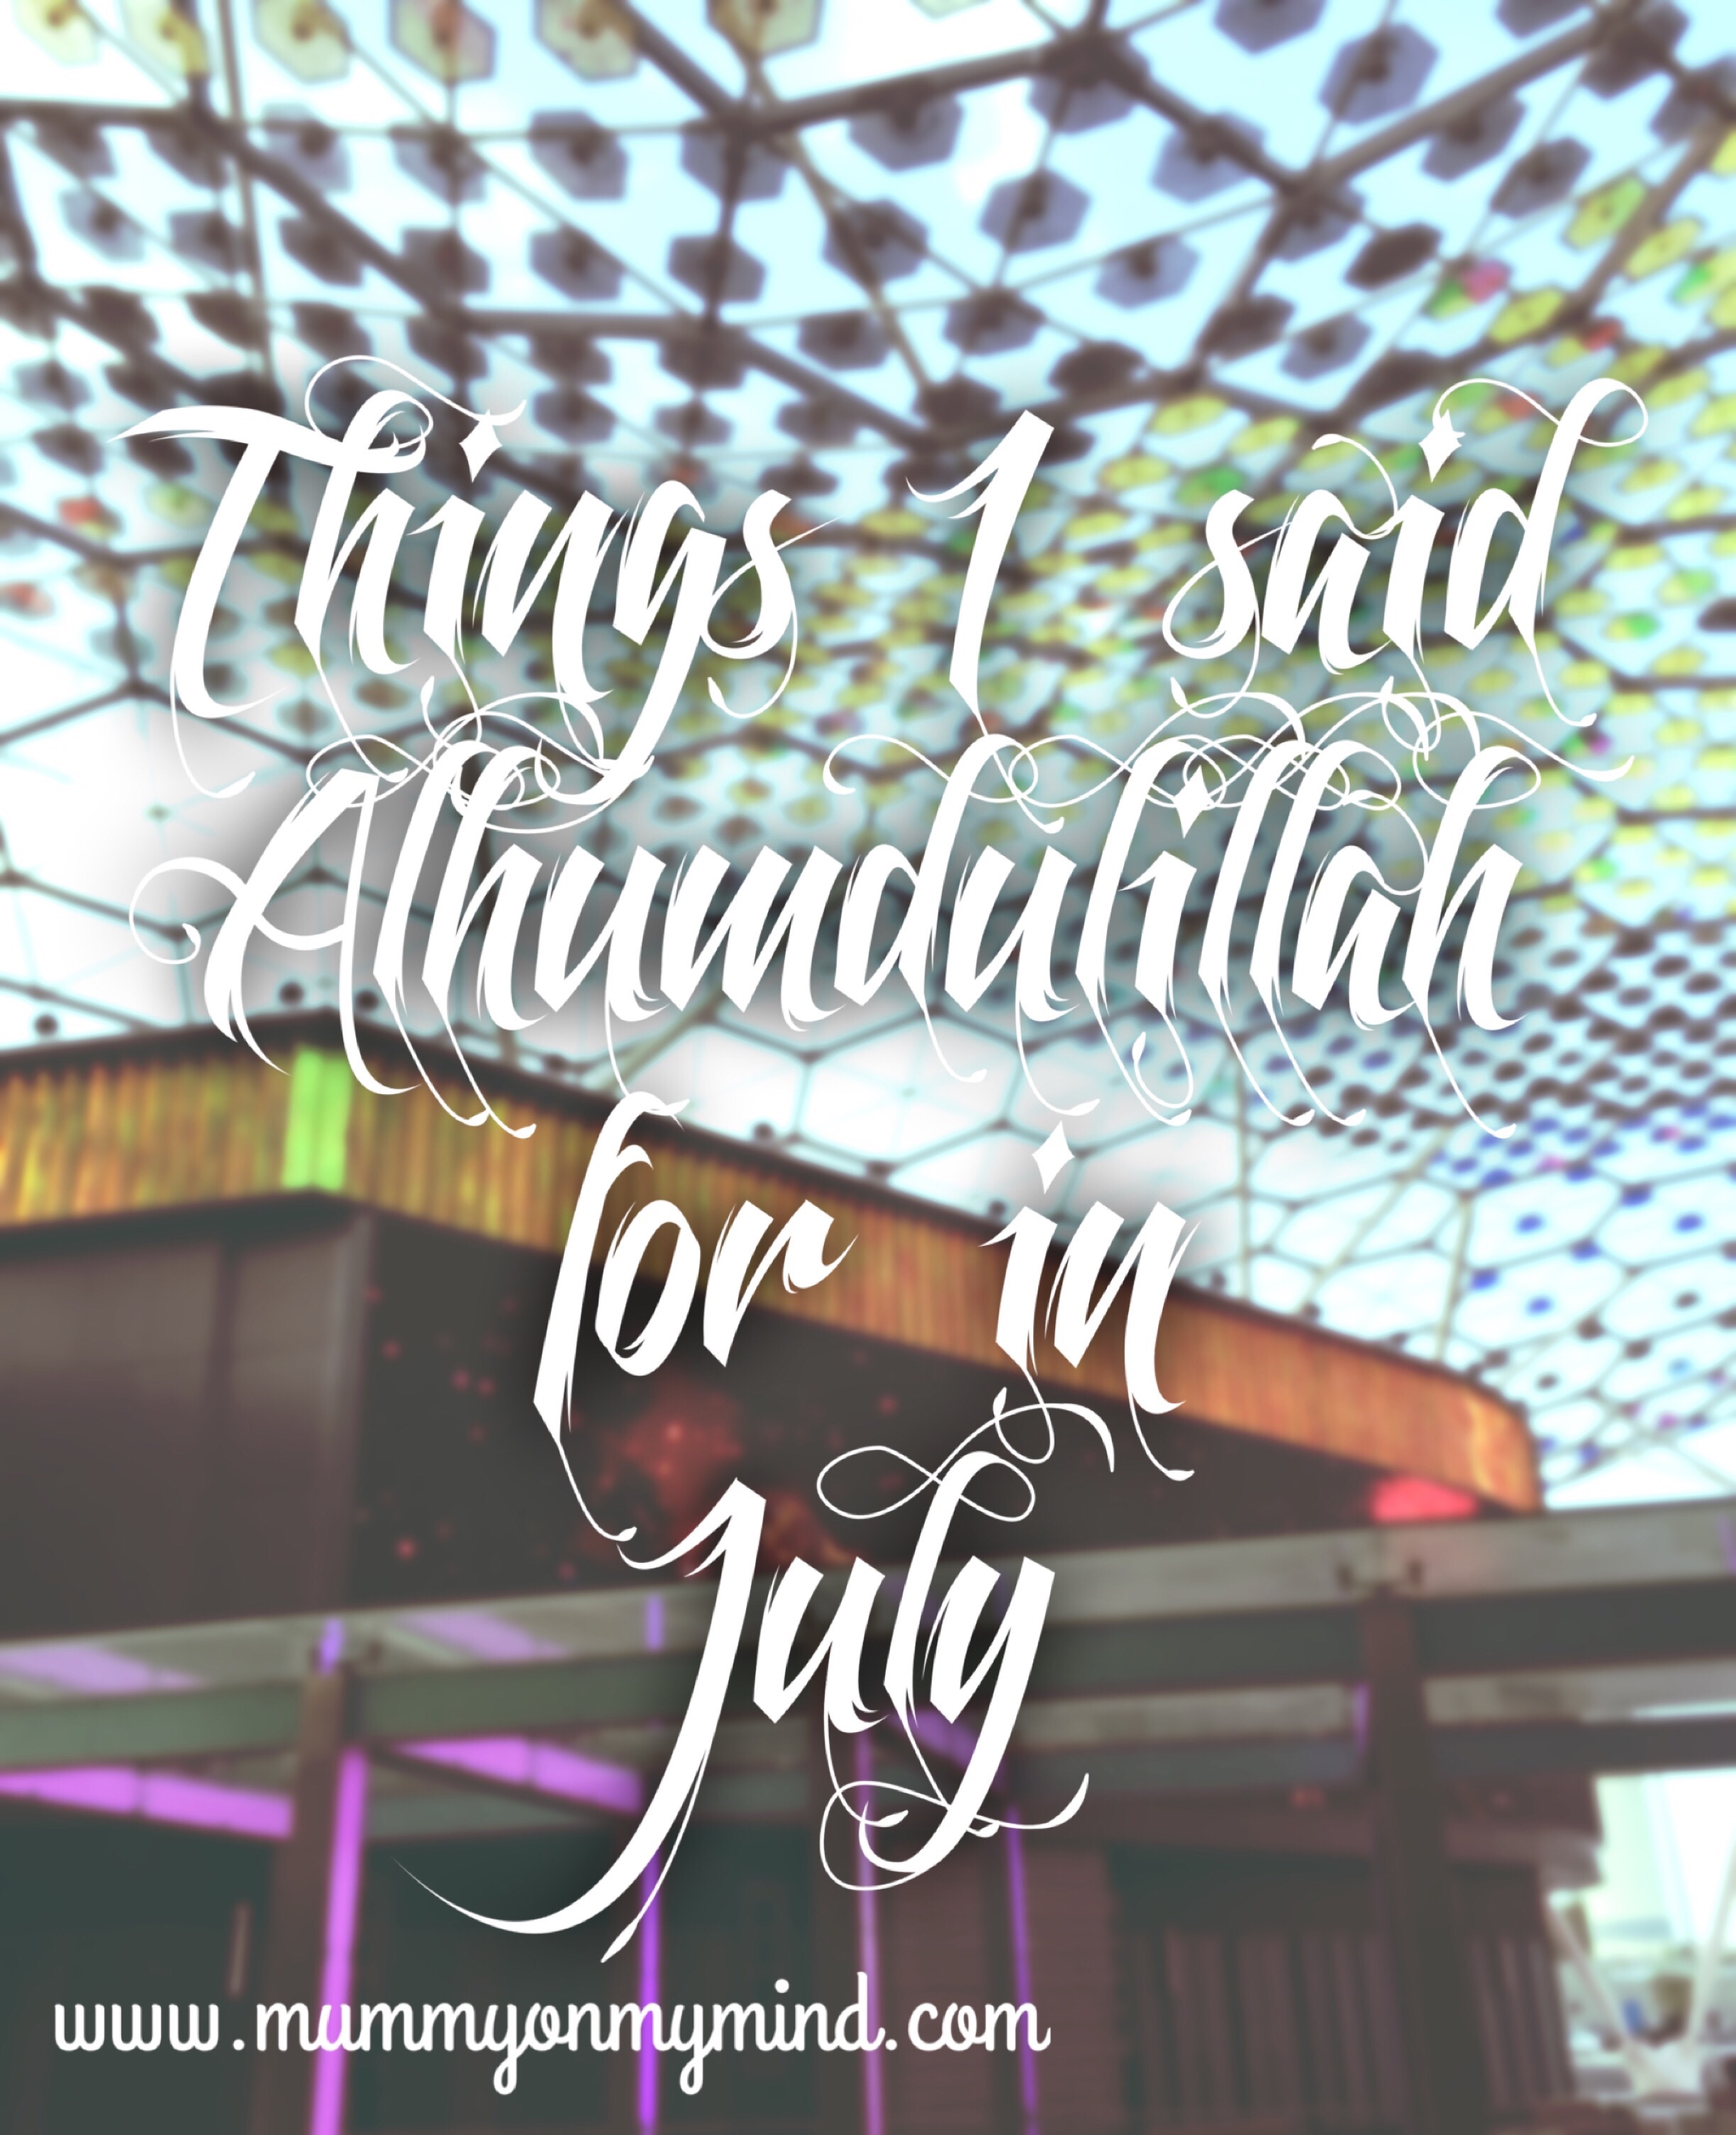 Things I said Alhumdulillah for in July 2016…